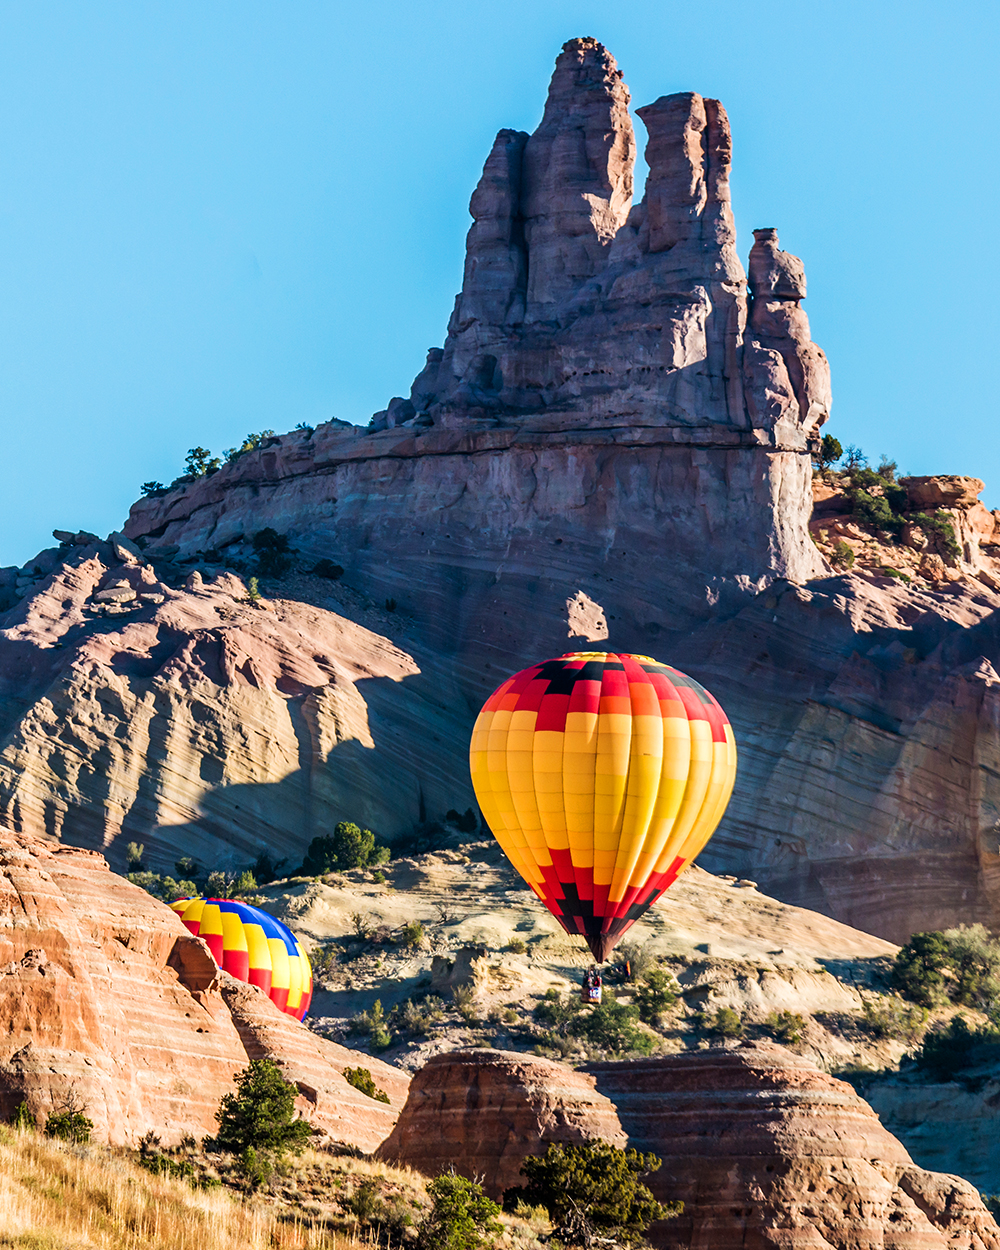 Hot air balloons flying over Castle Rock in the Red Rock Canyon near Gallup, New Mexico.